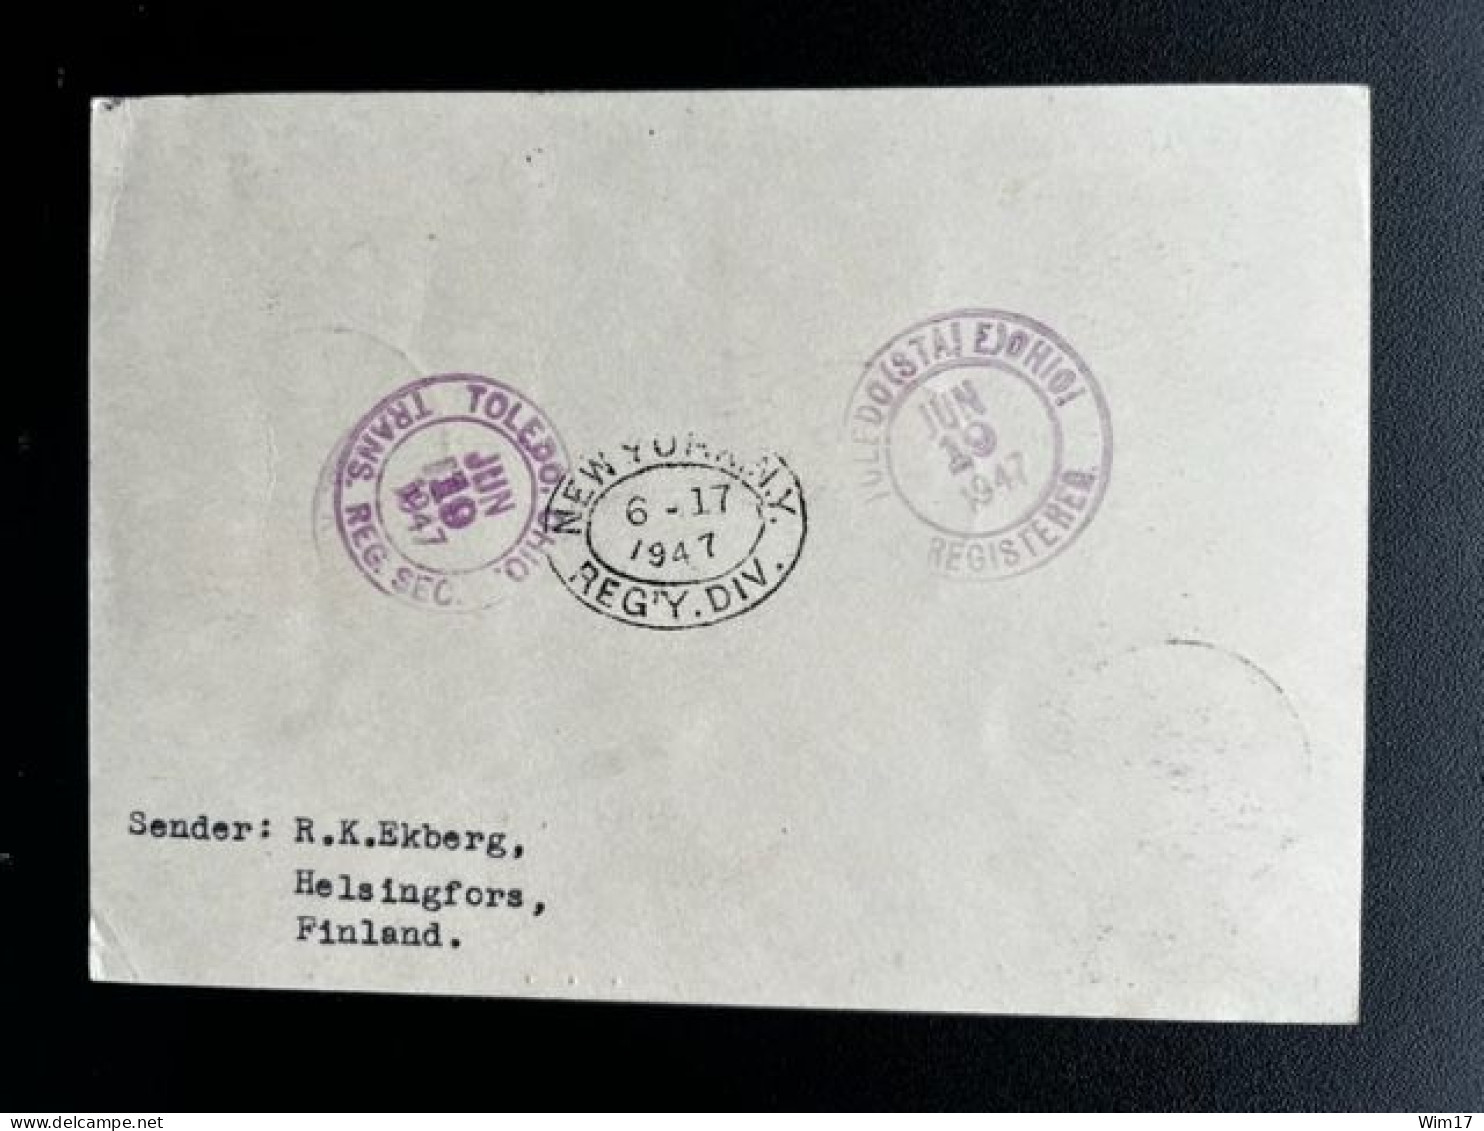 FINLAND SUOMI 1947 REGISTERED POSTCARD HELSINKI HELSINGFORS TO TOLEDO USA 02-06-1947 WITH FIRST DAY CANCEL HORSES - Covers & Documents